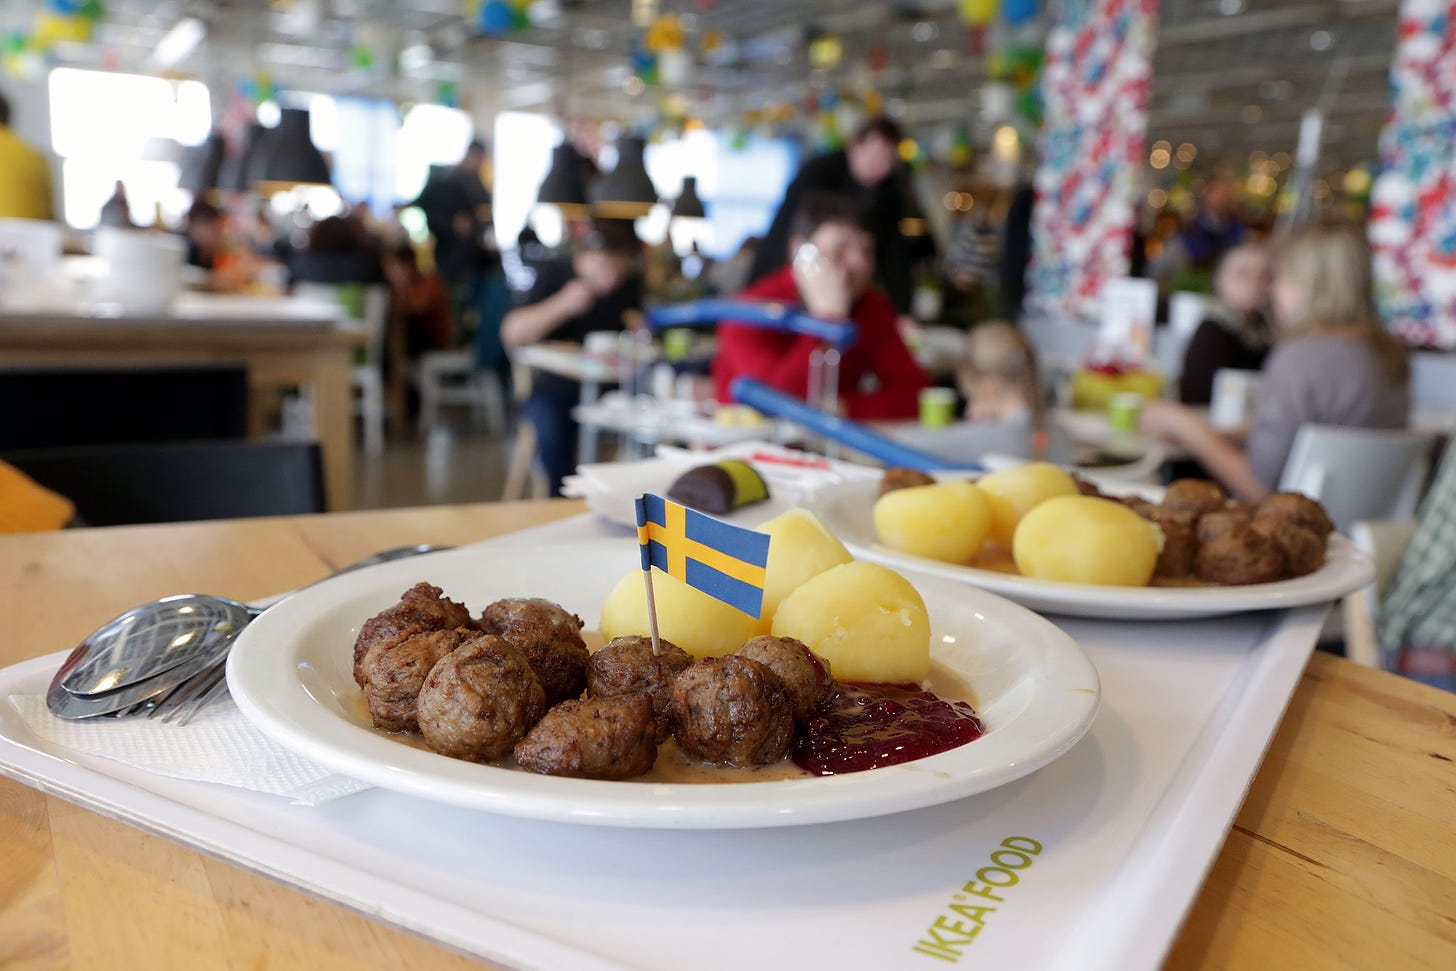 Ikea: What the Best Deals Are at Its Restaurant | Money